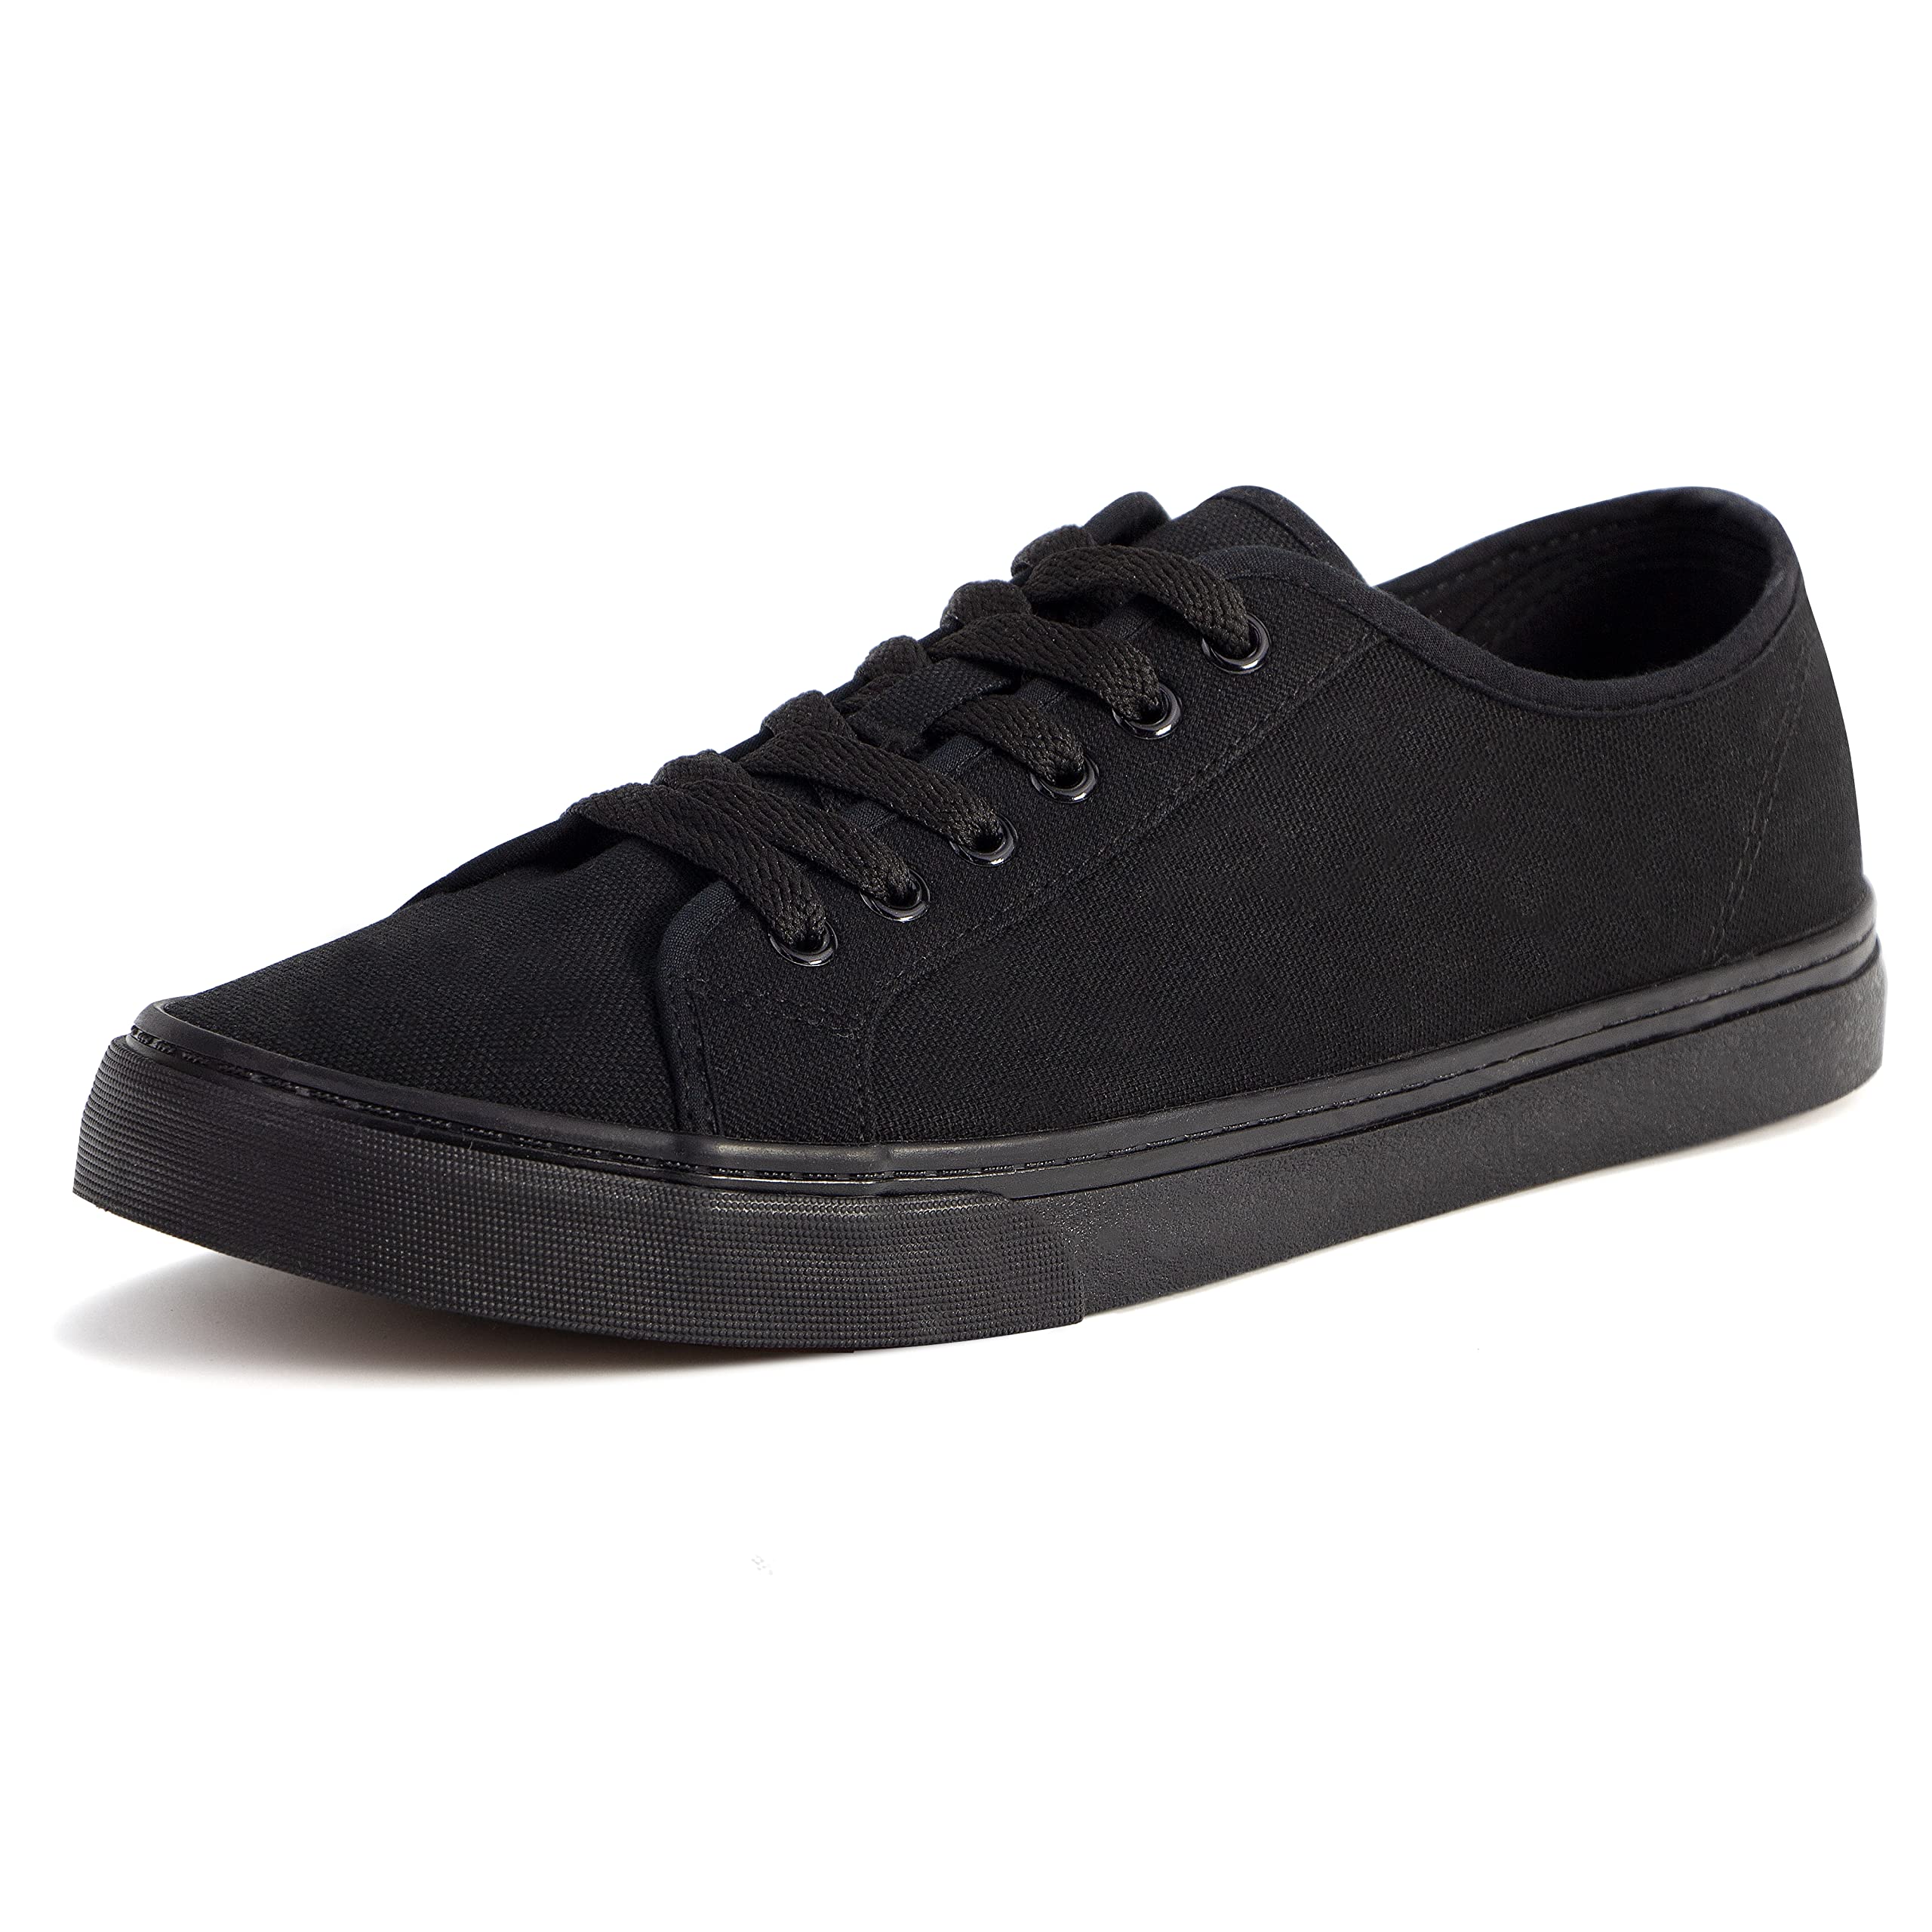 Tober Menas Canvas Low Top Shoes Skate Shoes All Black Fashion Sneakers For Men Comfortable Walking Casual Shoes